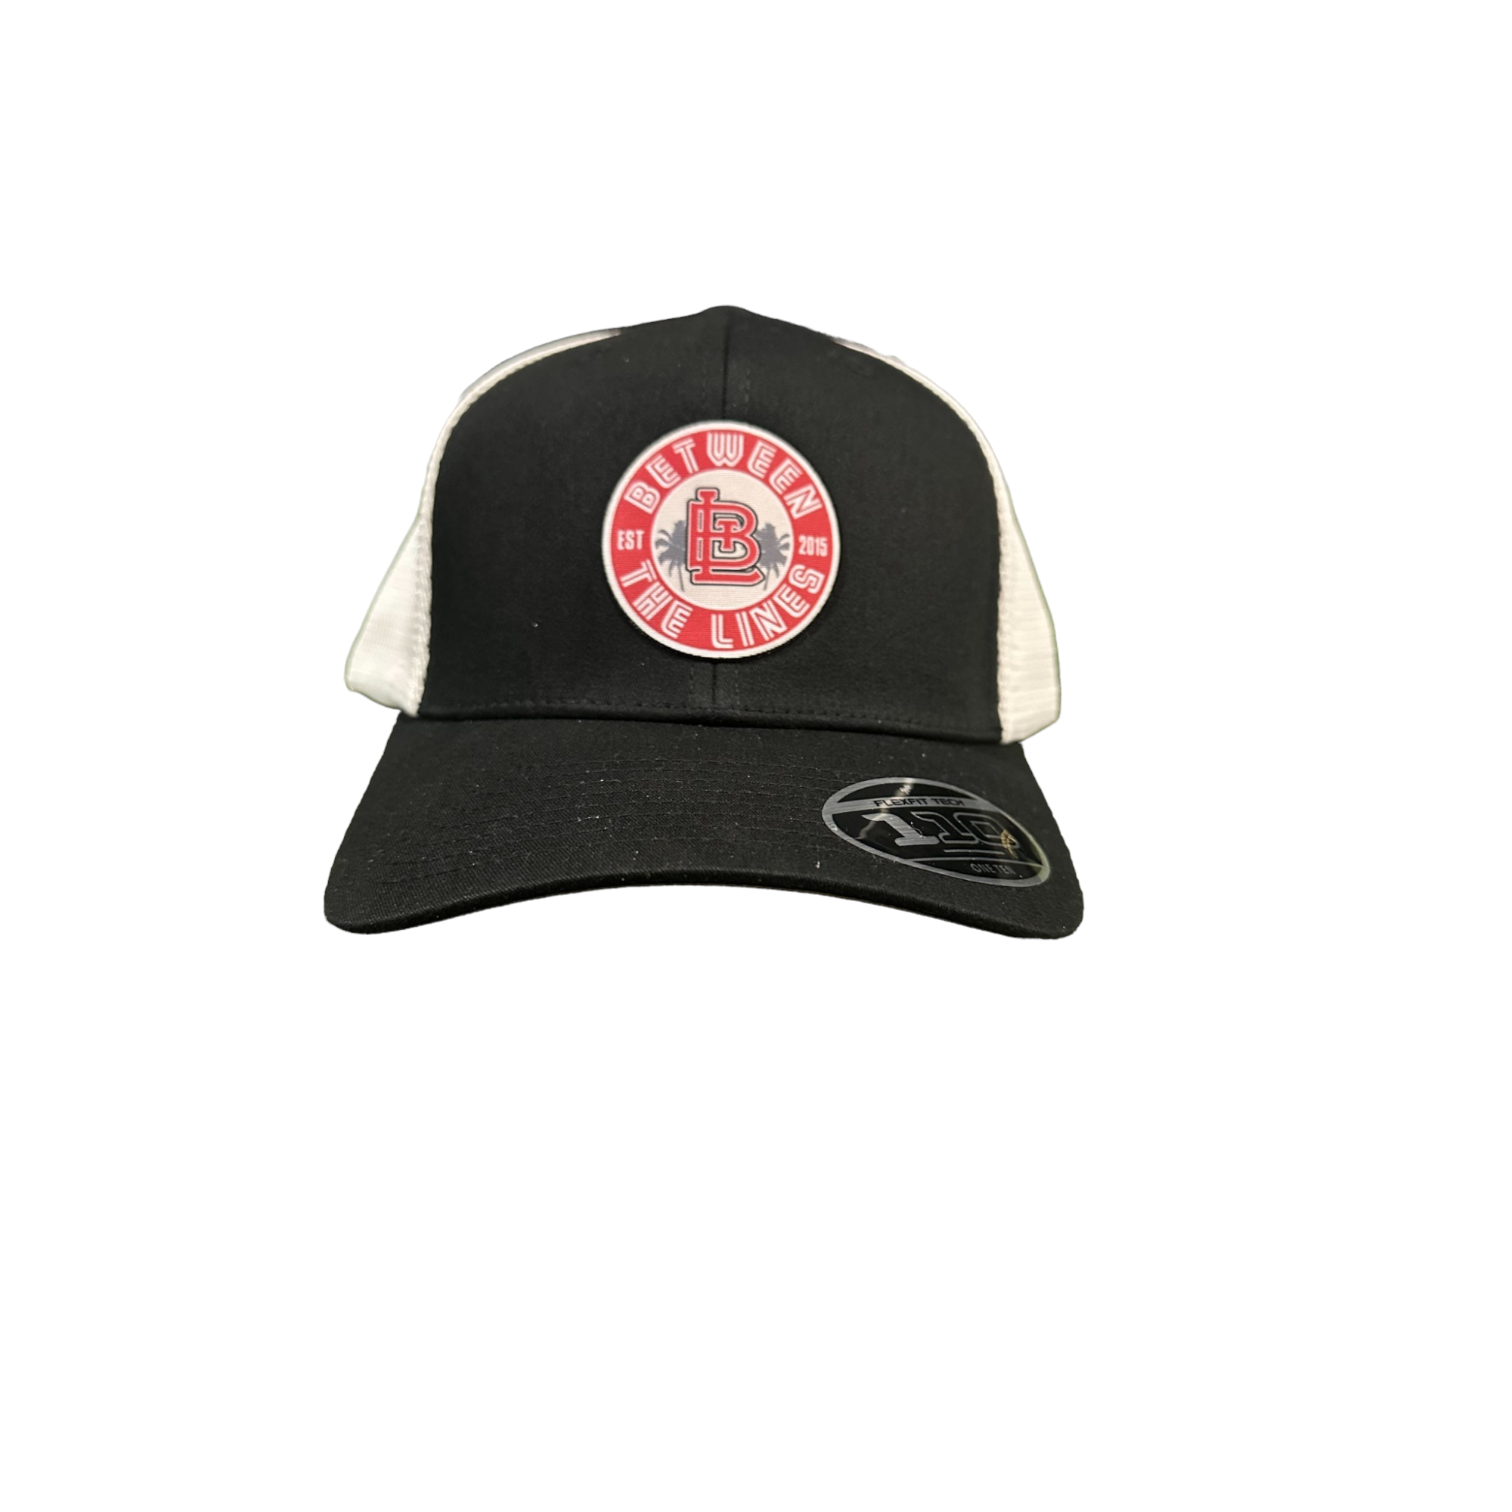 Between The Lines  Black/White  Trucker Hat Palm Badge